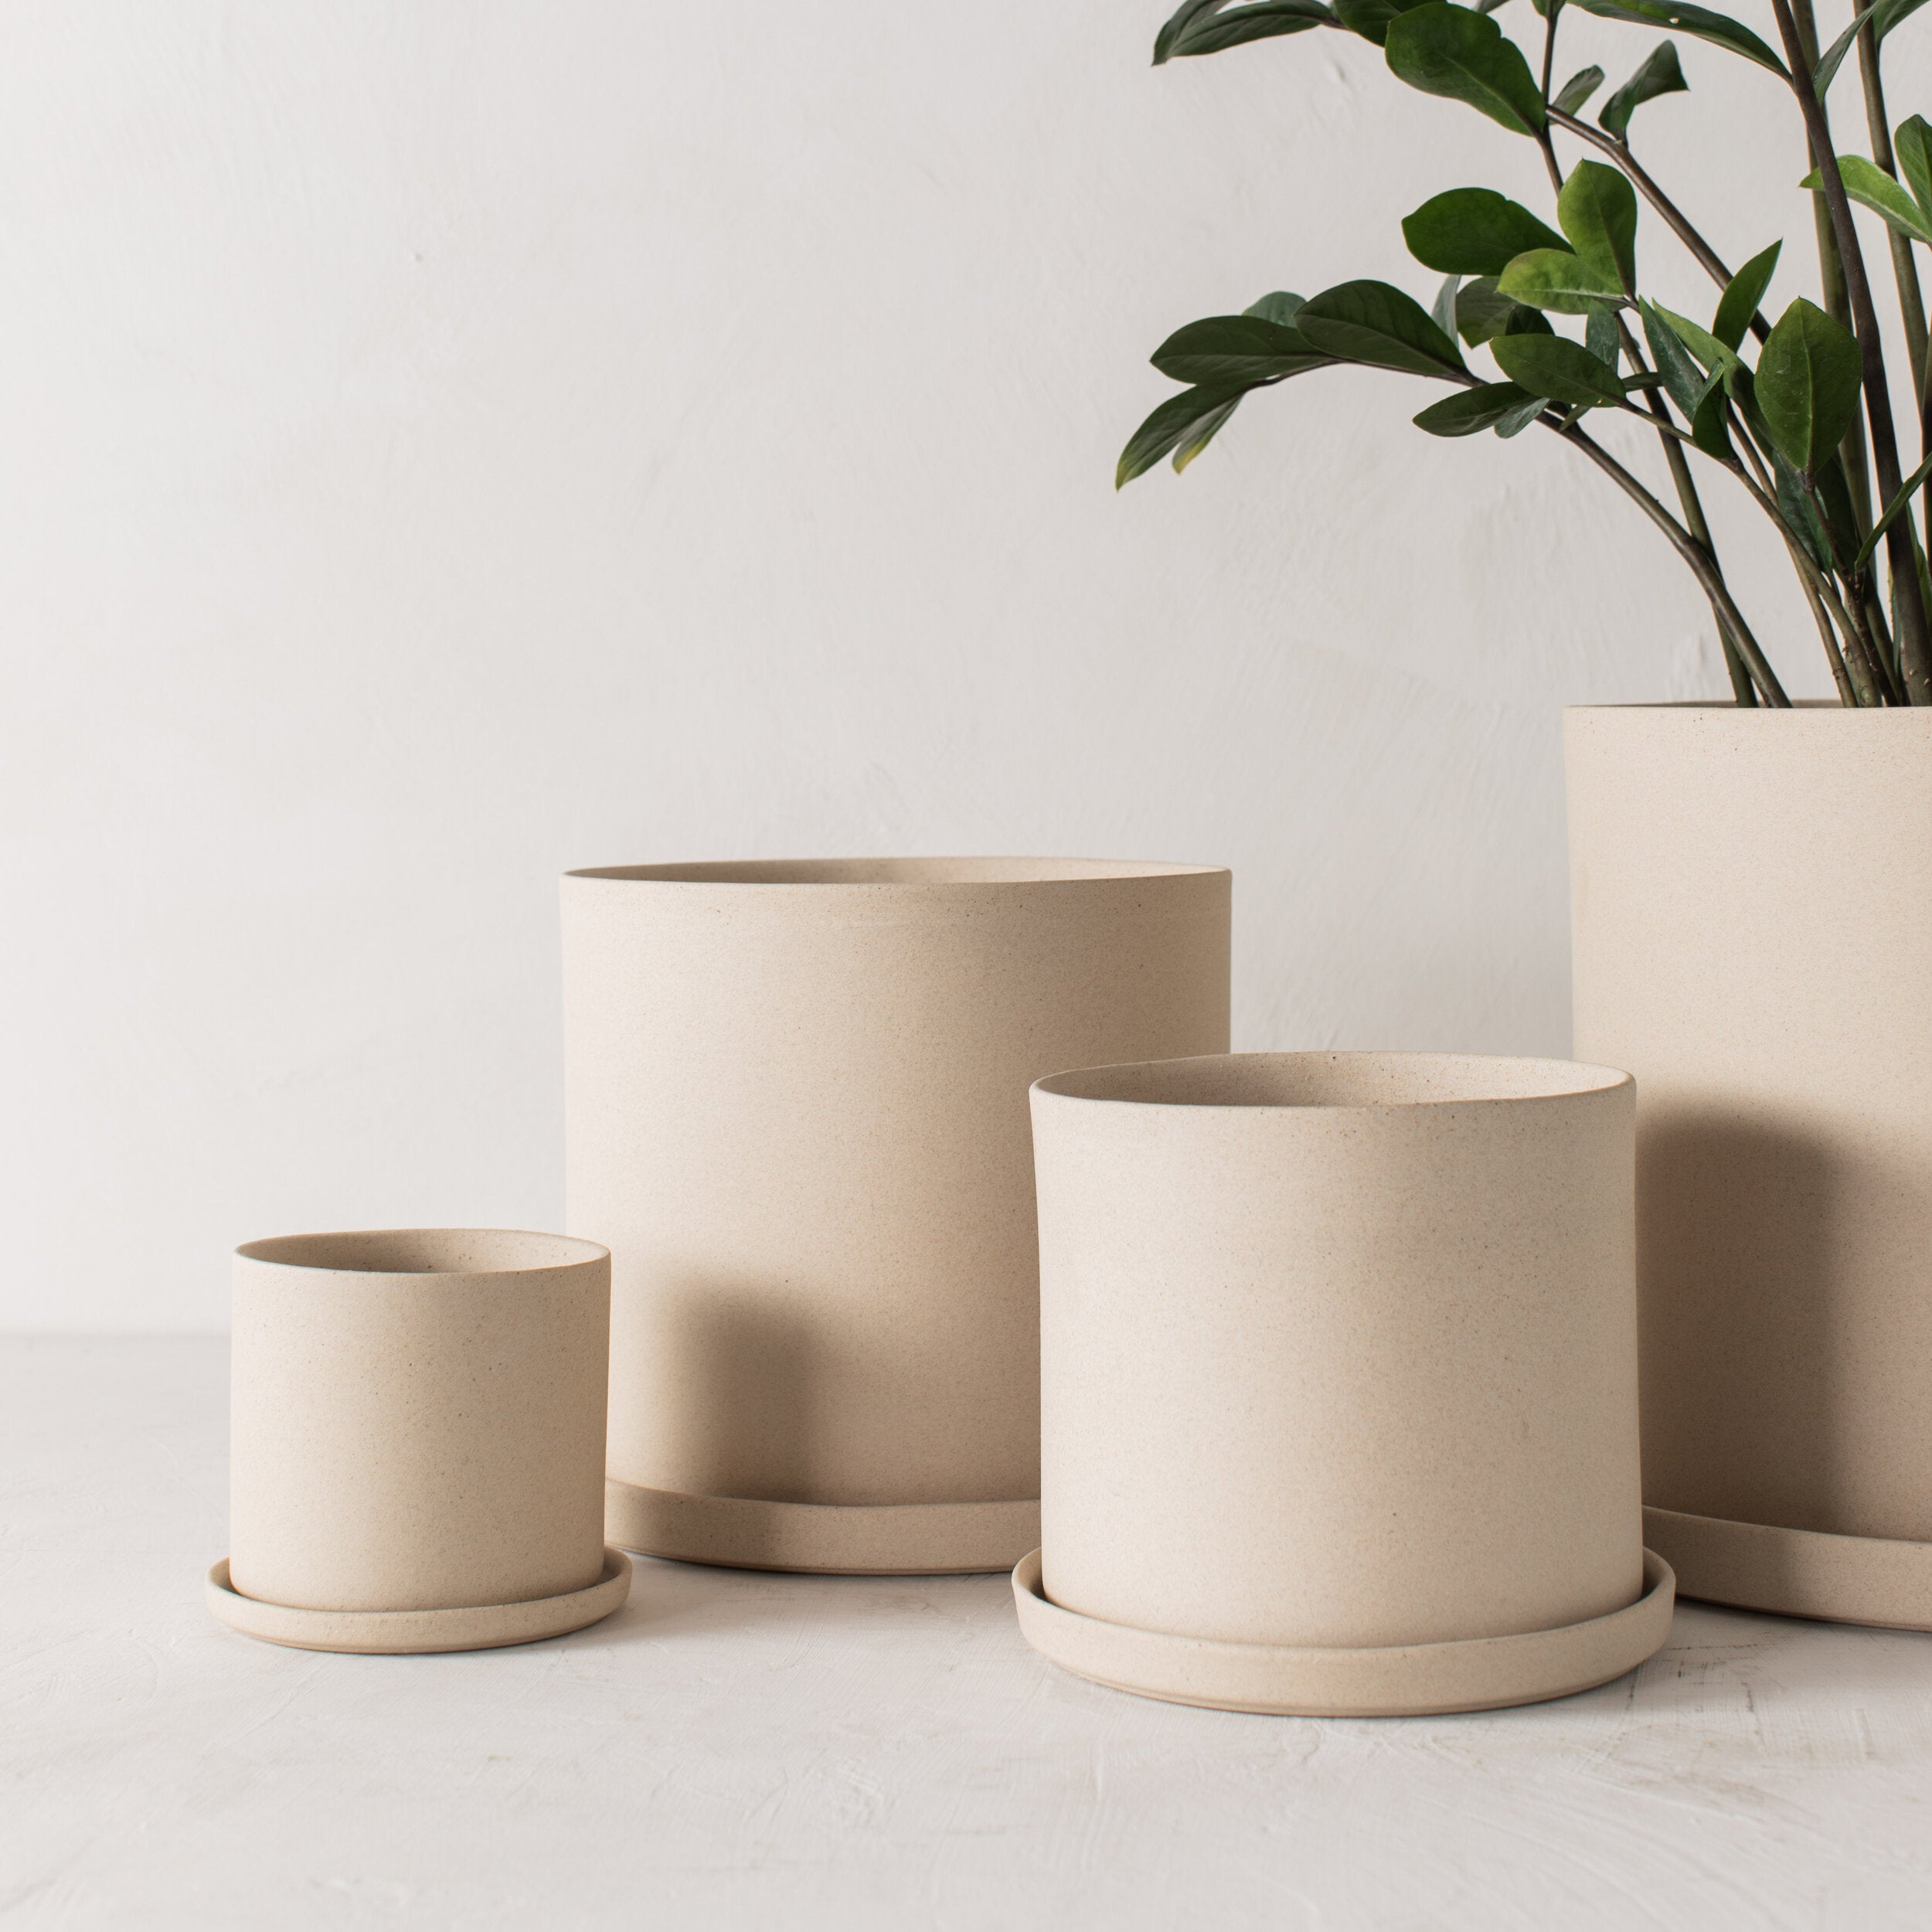 Three stoneware ceramic planters with bottom drainage dishes, 6, 8, and 10 inches. Staged on a white plaster textured tabletop against a plaster textured white wall. Large tall zz plant inside the 10 inch. Designed and sold by Convivial Production, Kansas City Ceramics. 